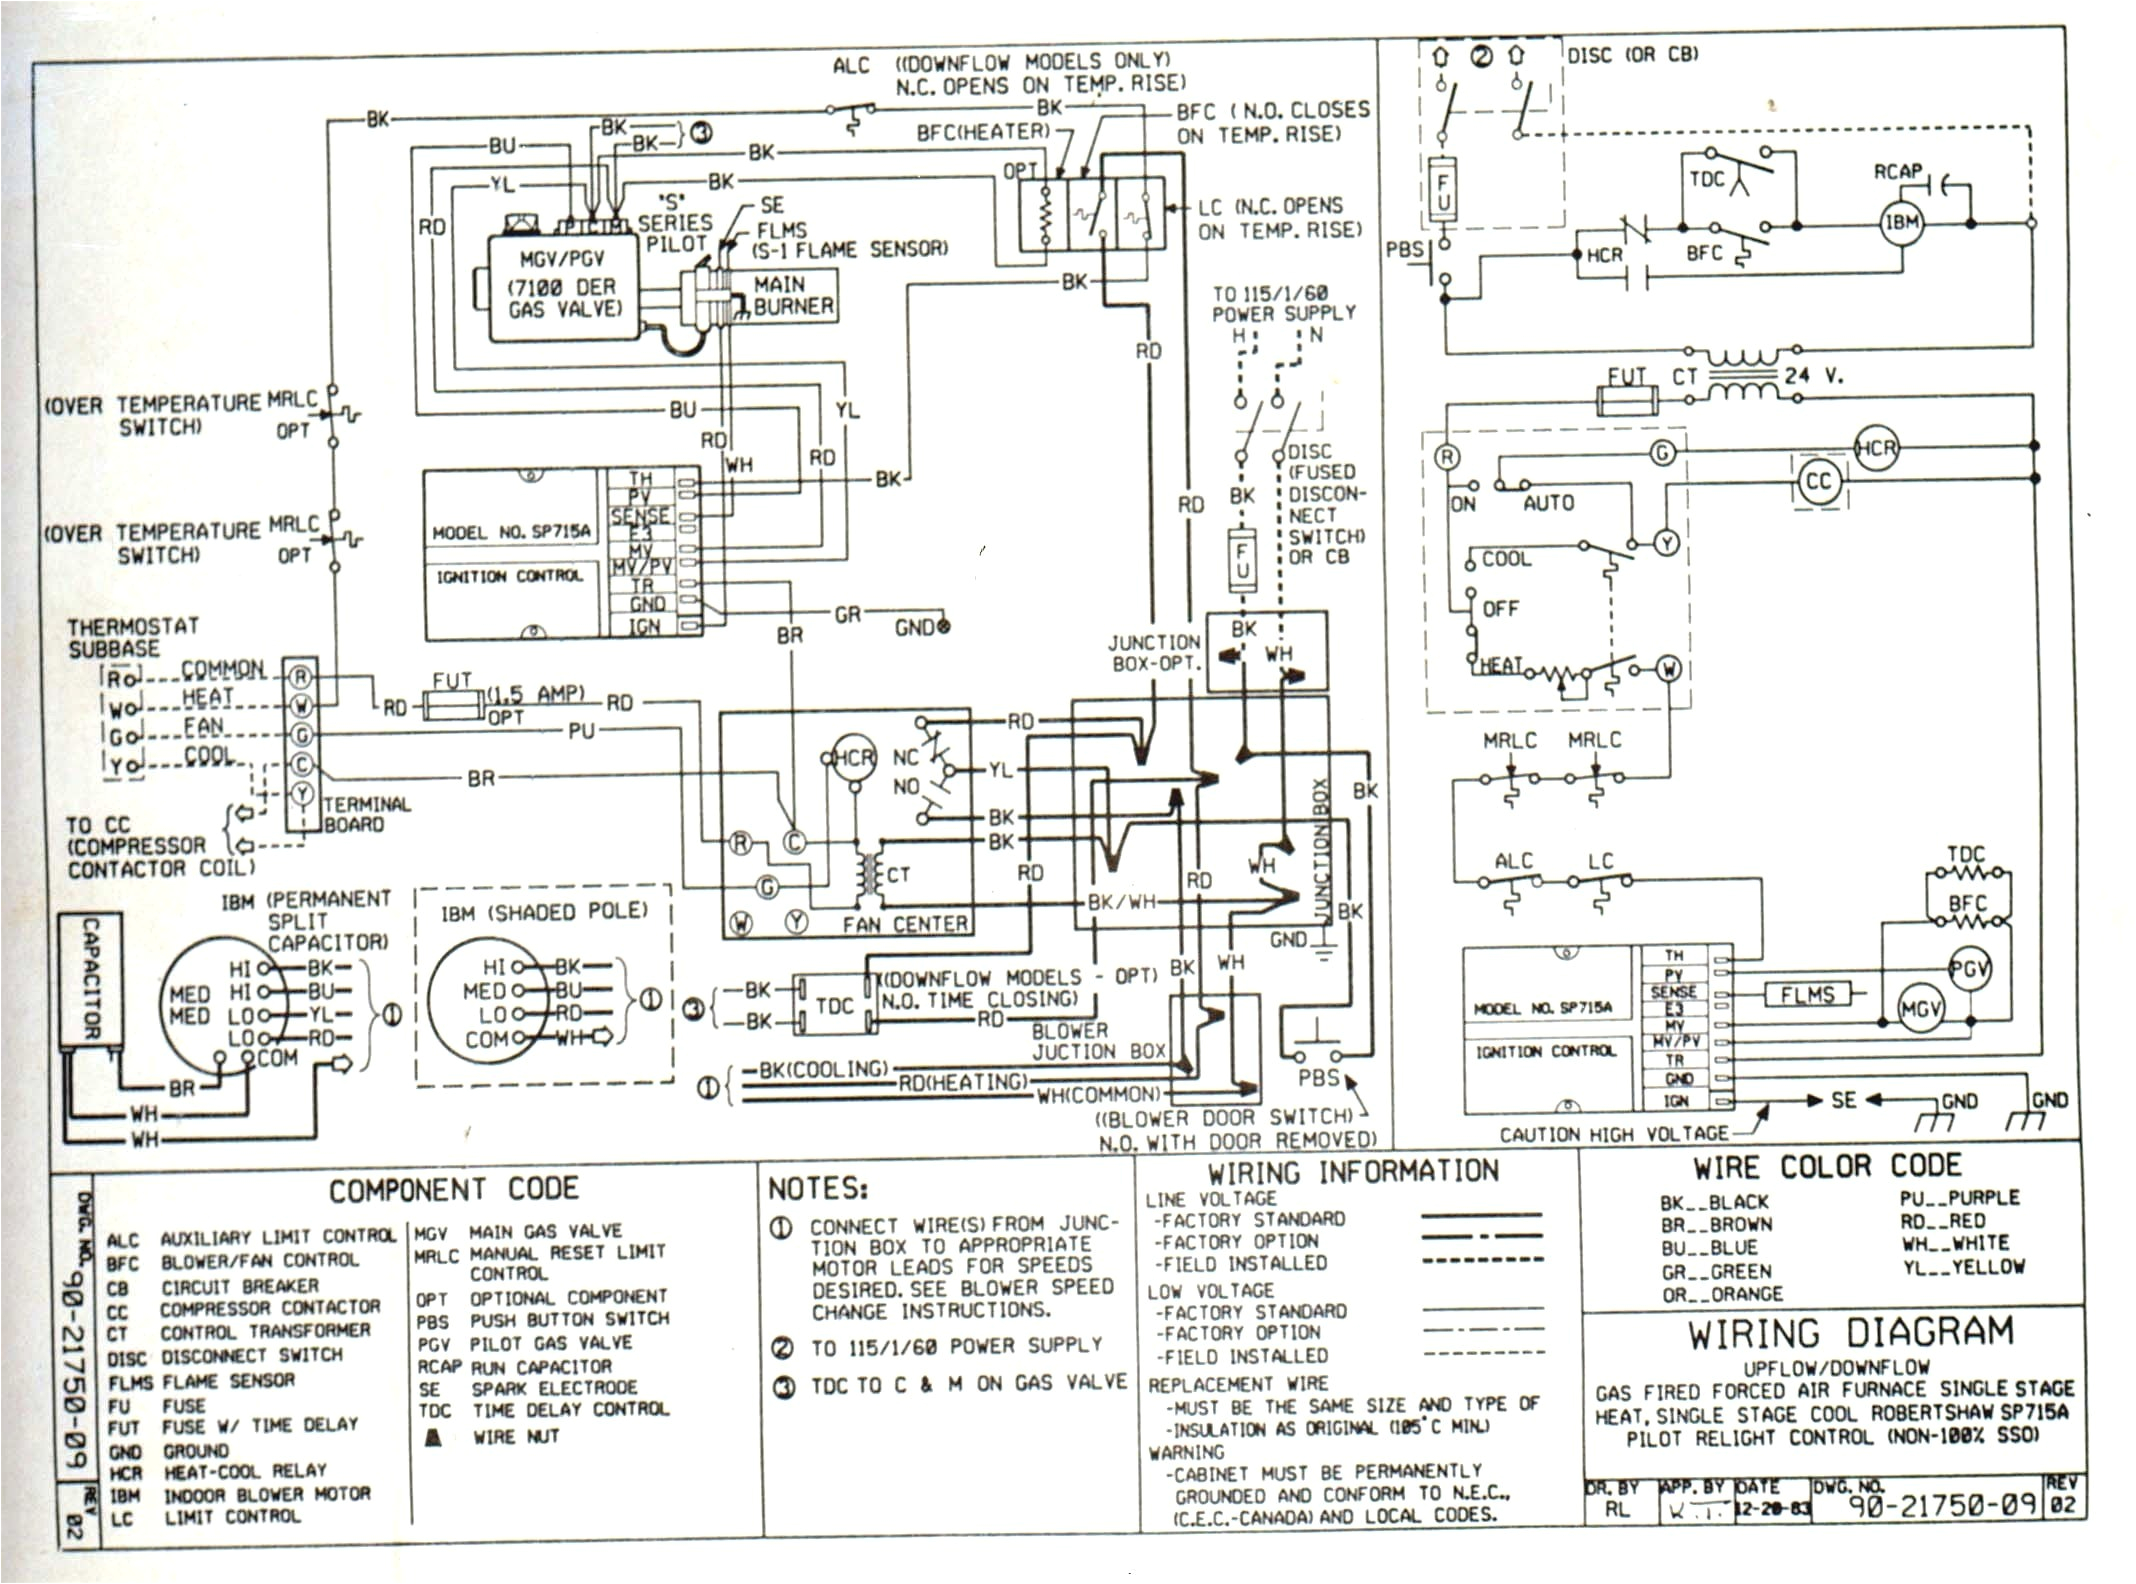 How to Read A Wiring Diagram Symbols Arcoaire Air Conditioner Wiring Schmatics Air Conditioning Wiring